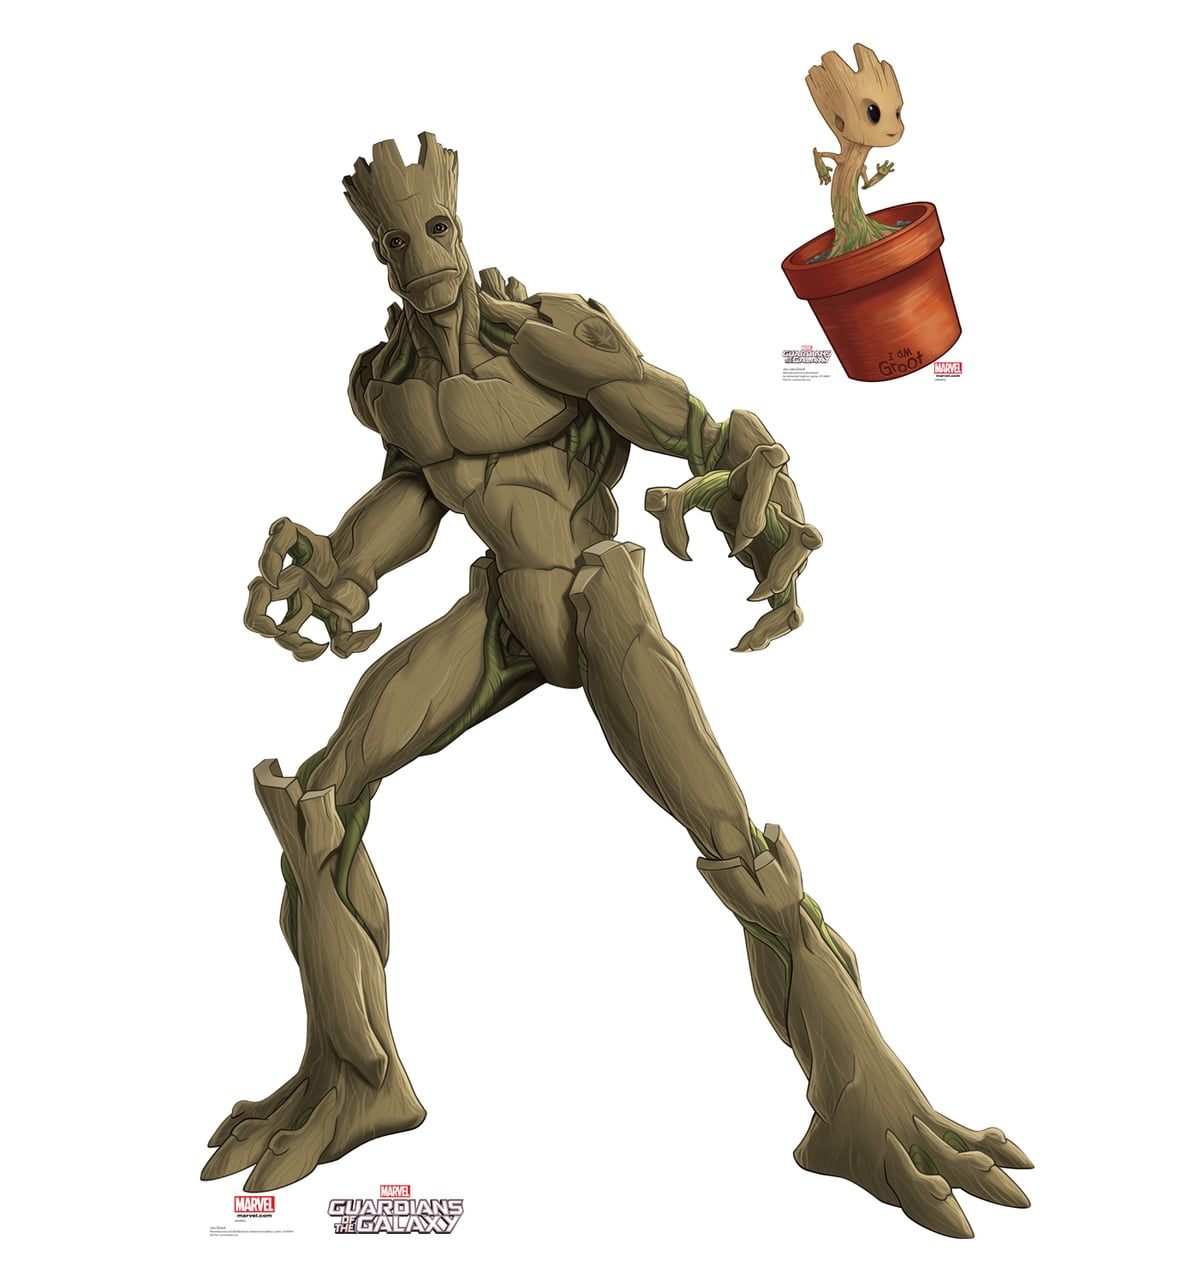 Picture of Advanced Graphics 2062 62 x 46 in. & 20 x 11 in. Groot & Little Groot - Animated Guardians of the Galaxy Cardboard Standup